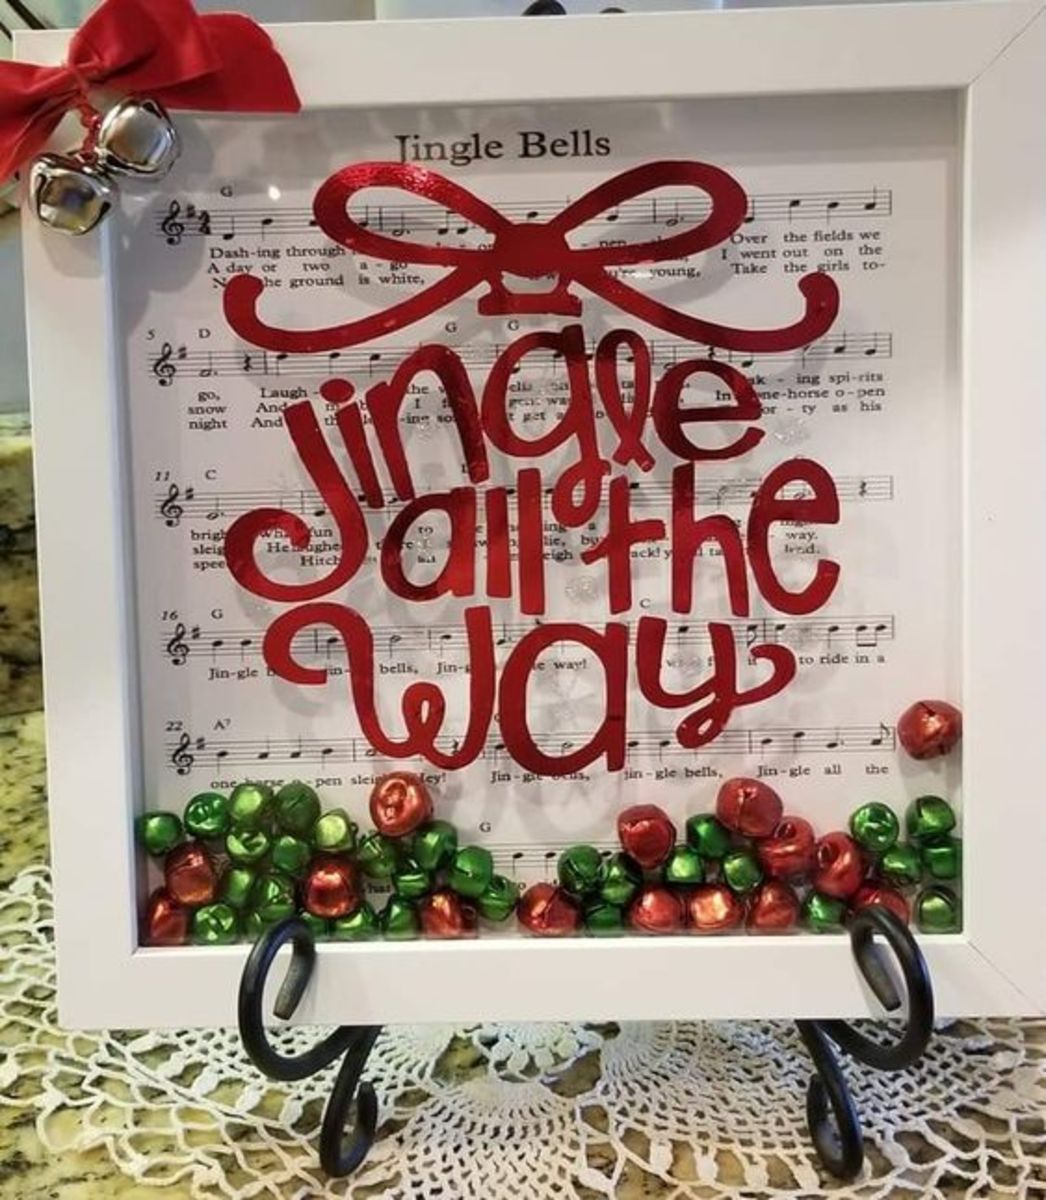 You can pair some Christmas song lyrics with a pile of baubles or other decorations in the box.